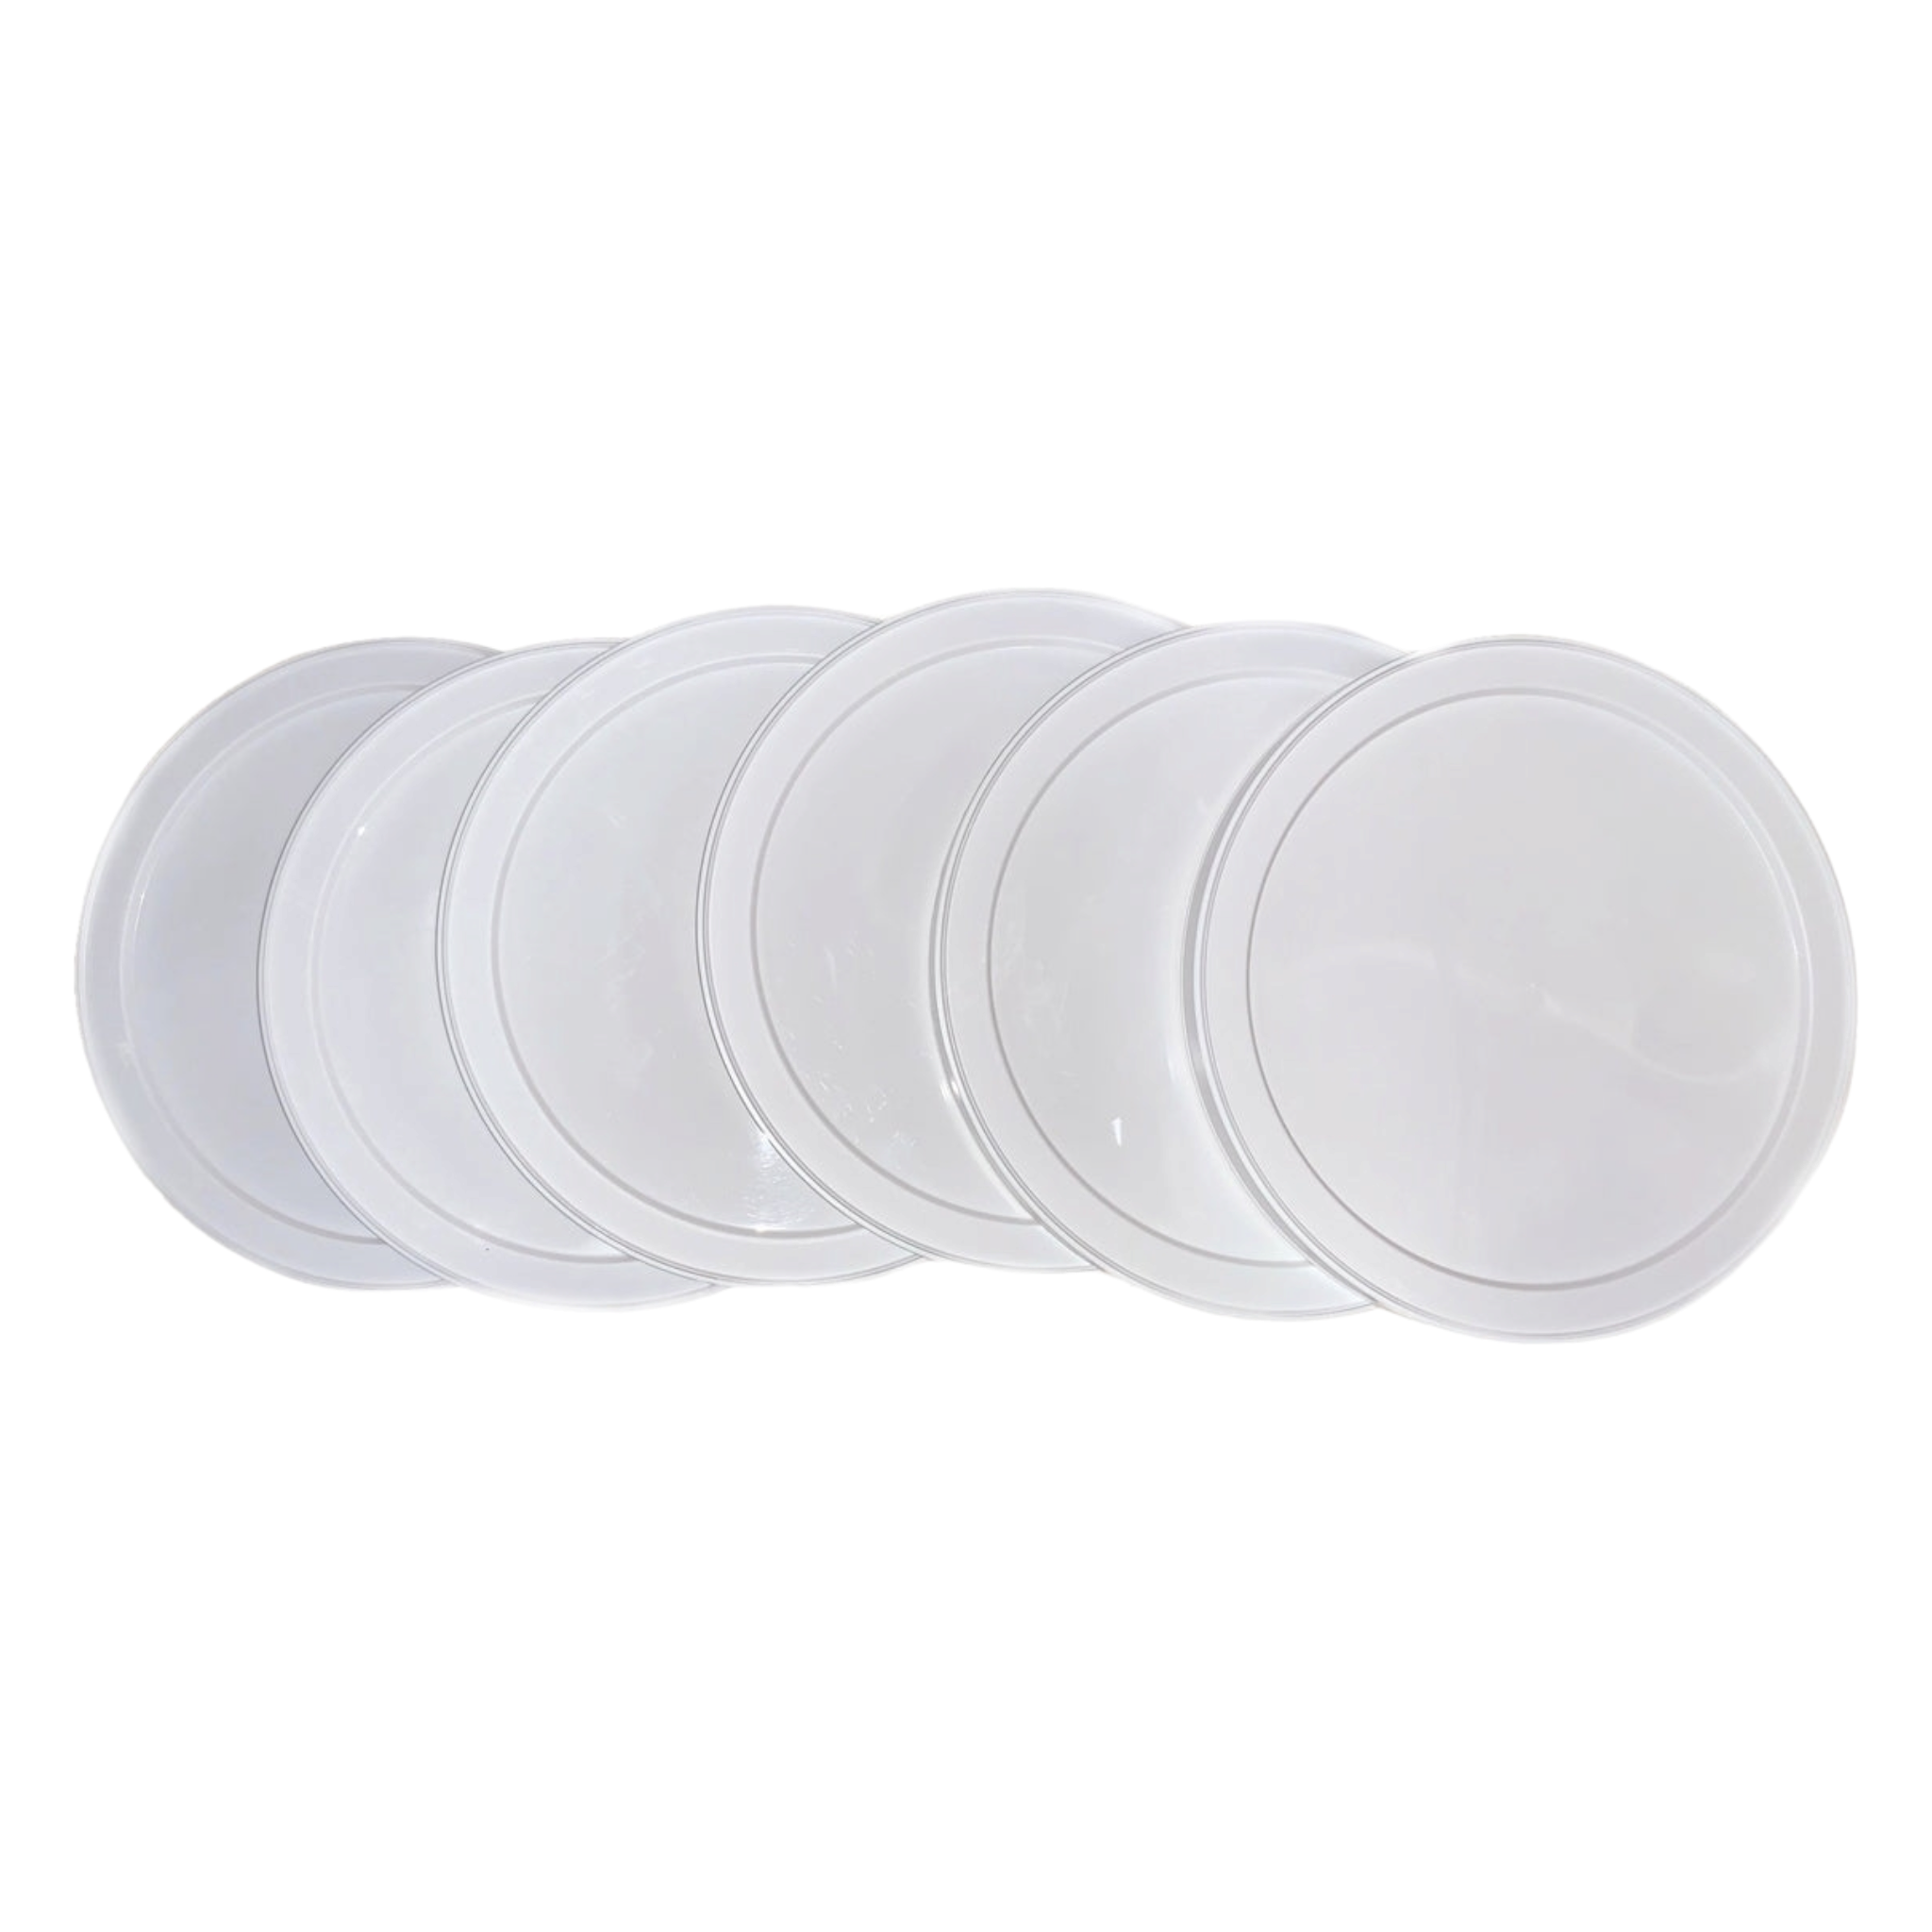 250ml Lids for Polystyrene Foam Cups HC.8 Disposable 100pack